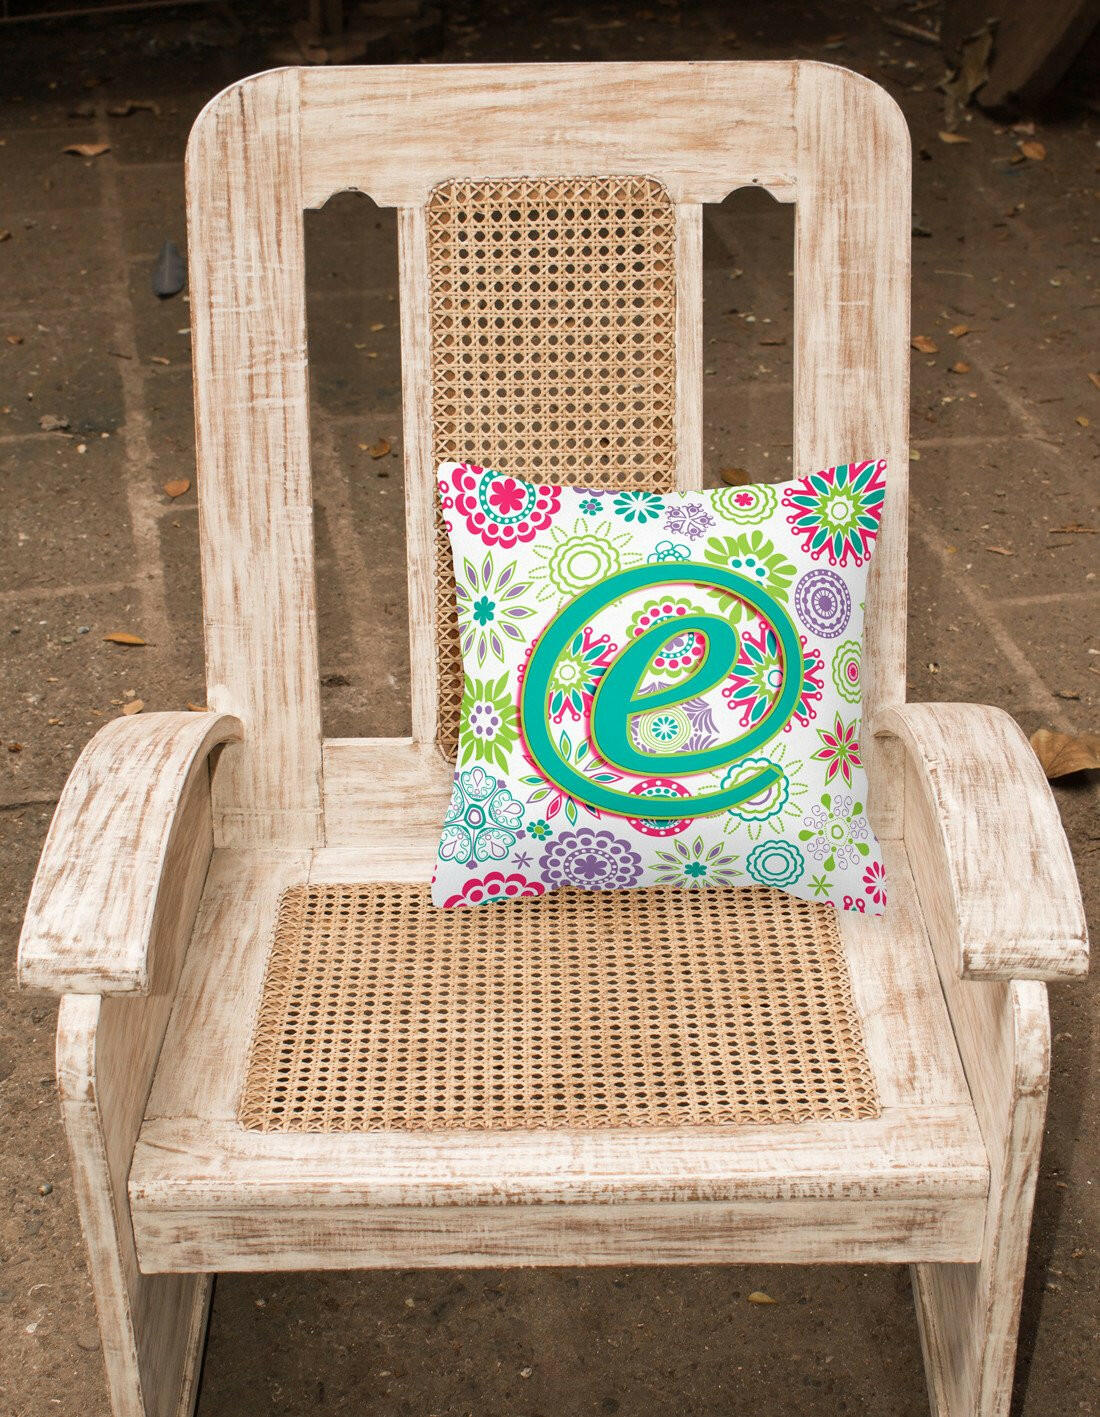 Letter E Flowers Pink Teal Green Initial Canvas Fabric Decorative Pillow CJ2011-EPW1414 by Caroline's Treasures